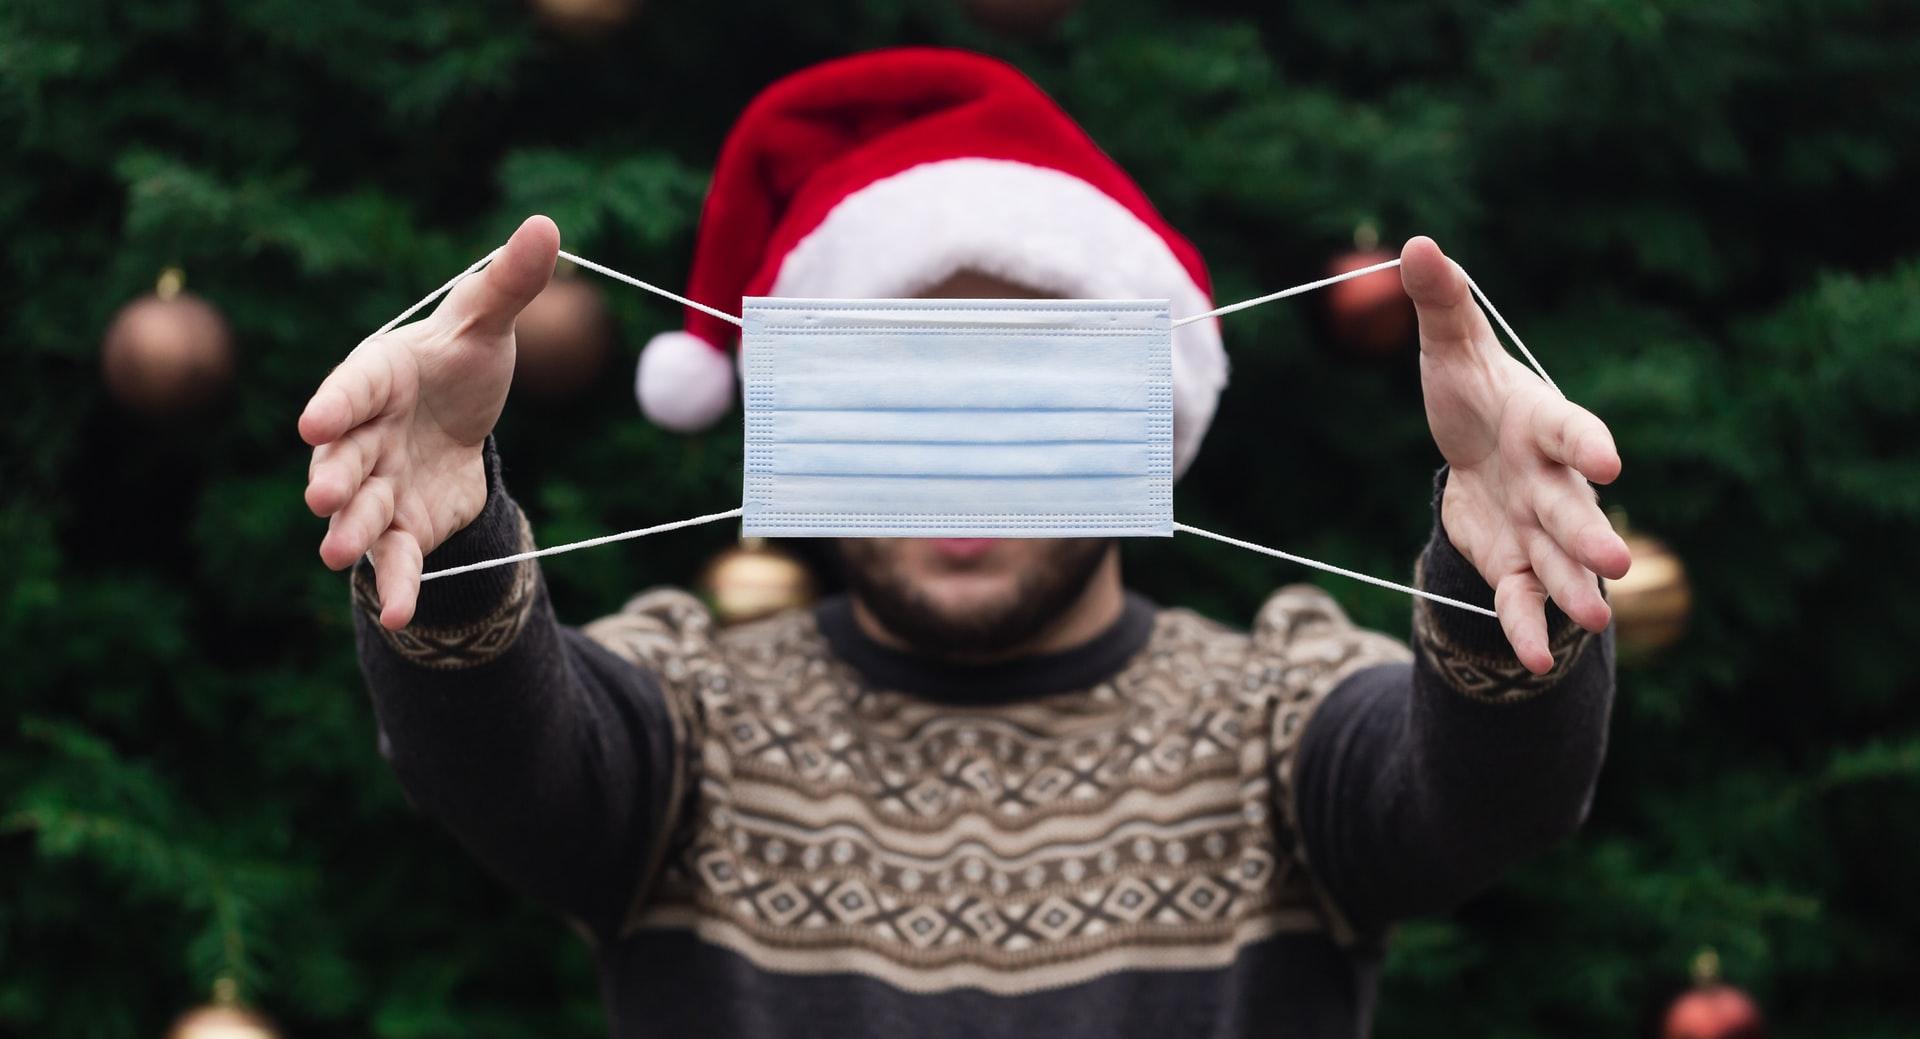 Staying Connected Over the Covid Holidays